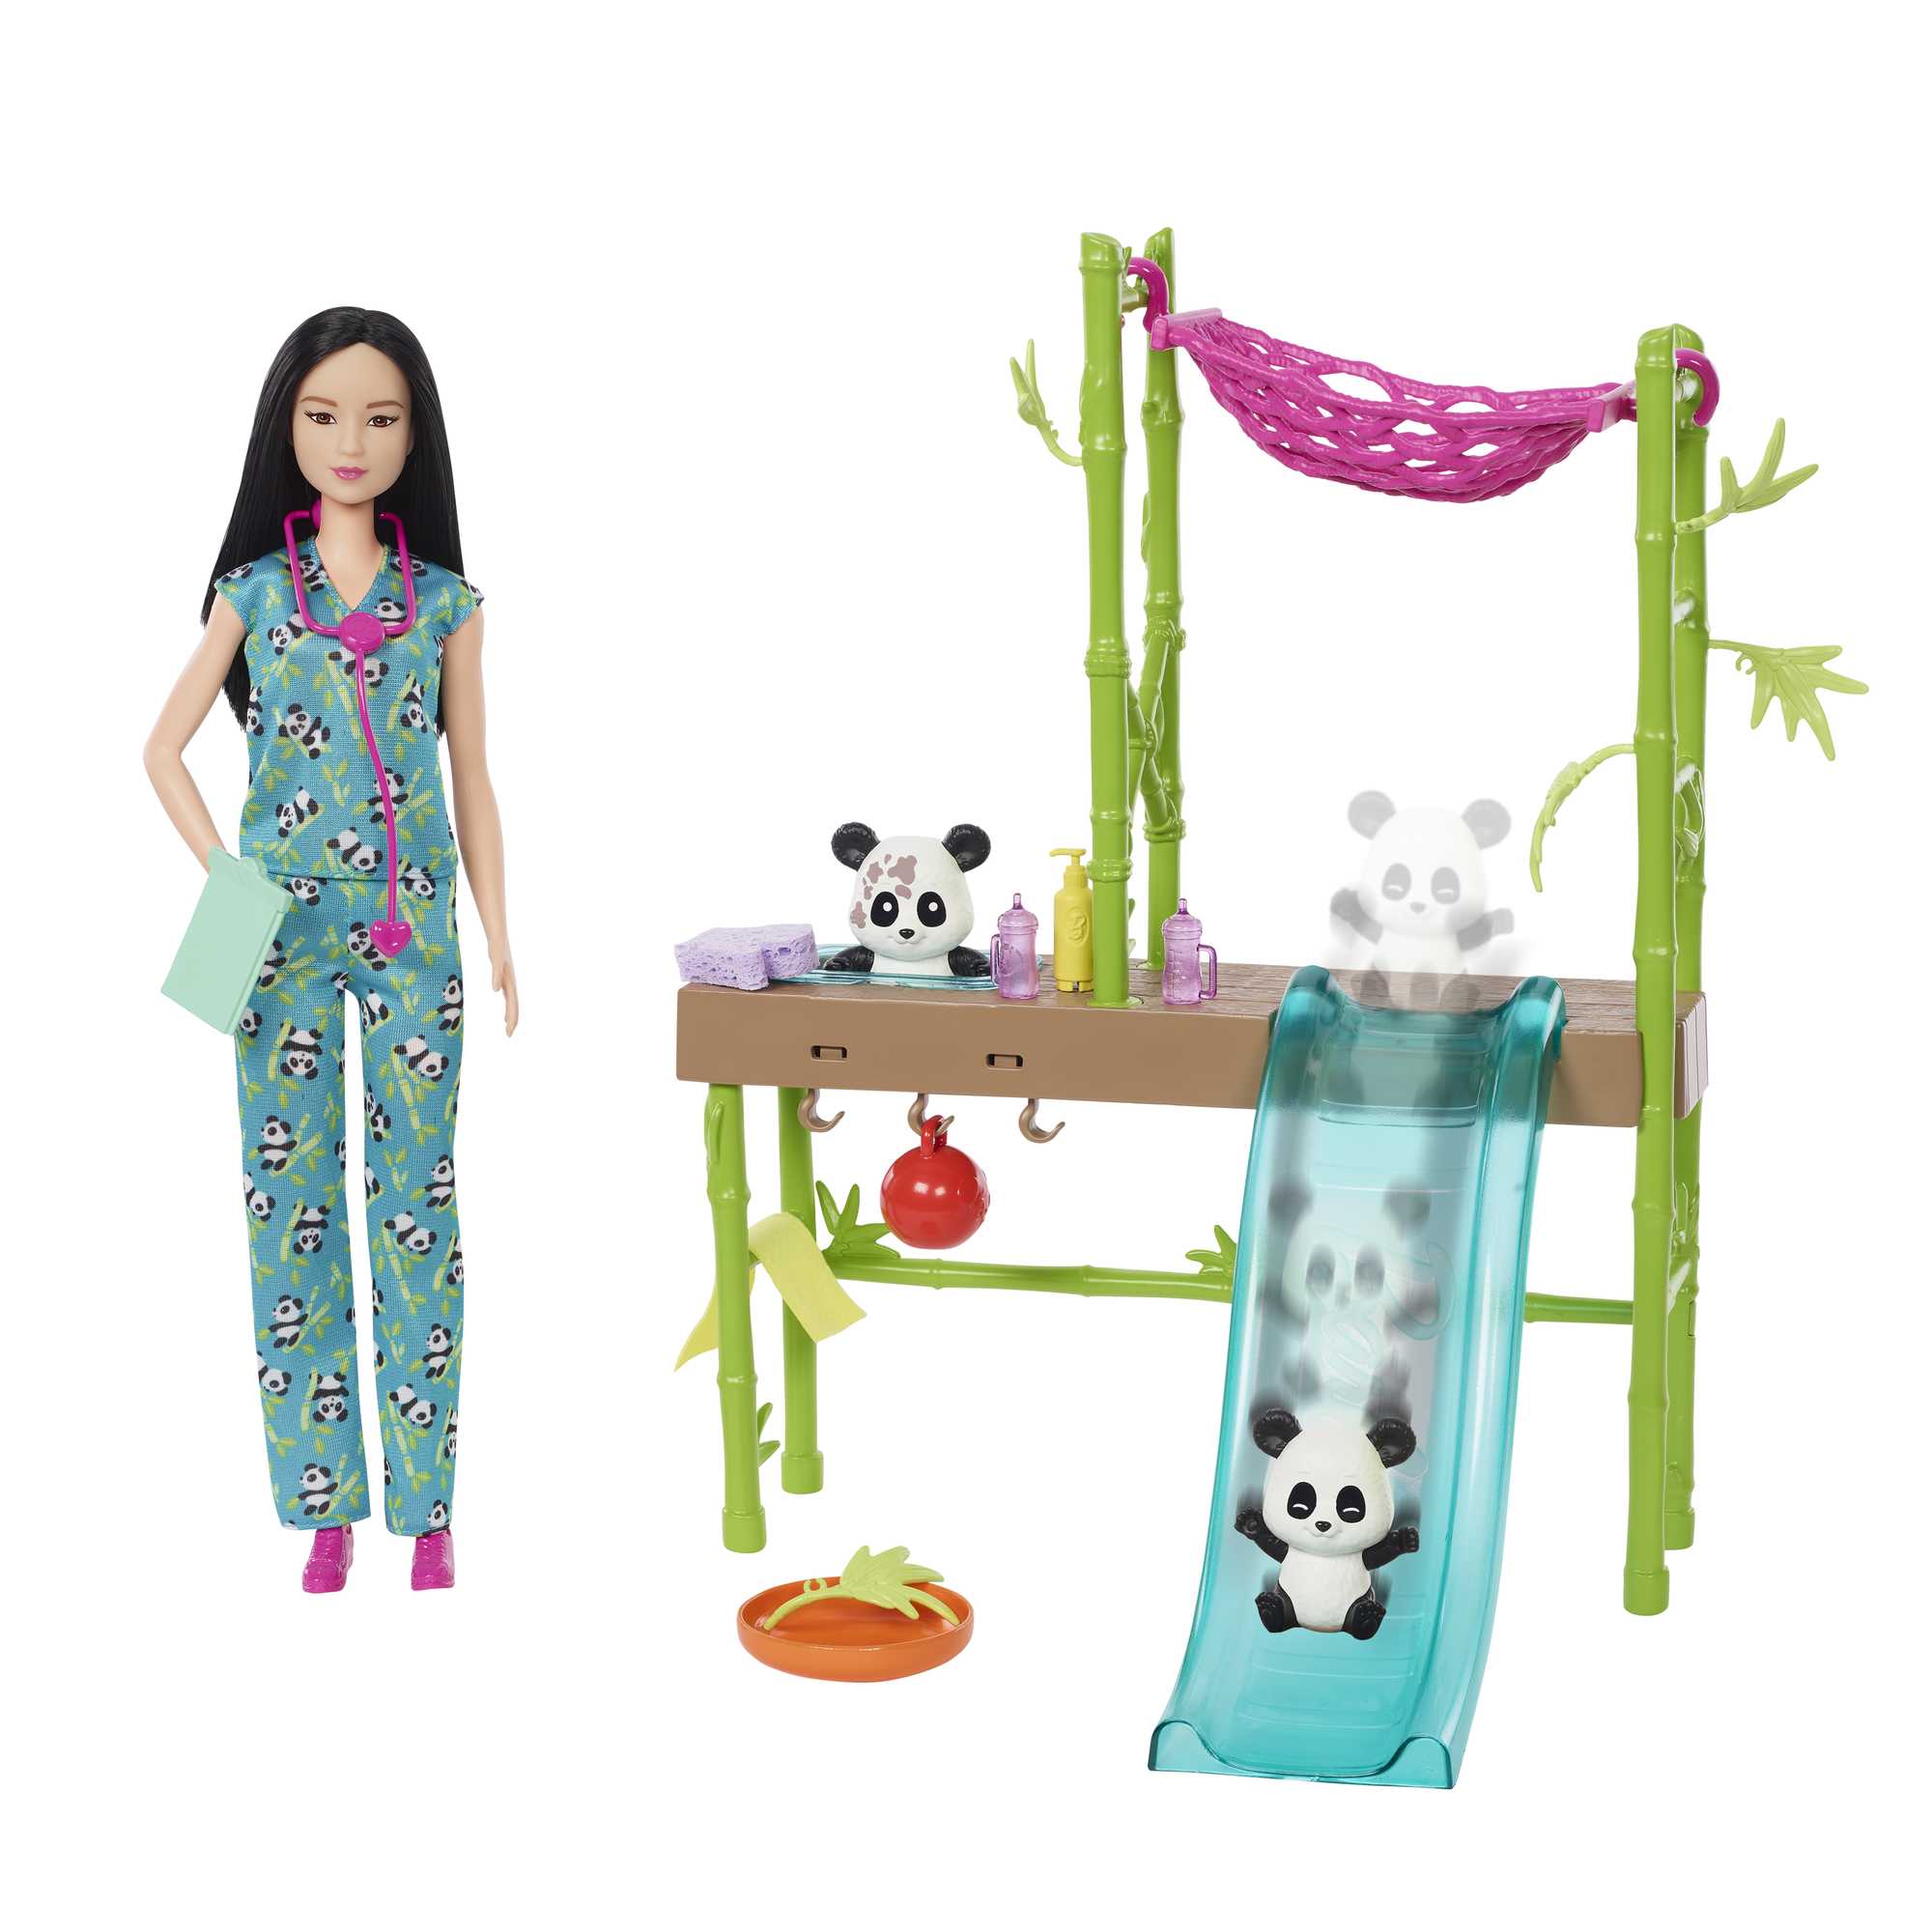 Barbie Doll and Accessories, Panda Care and Rescue Playset with Color-Change and 20+ Pieces